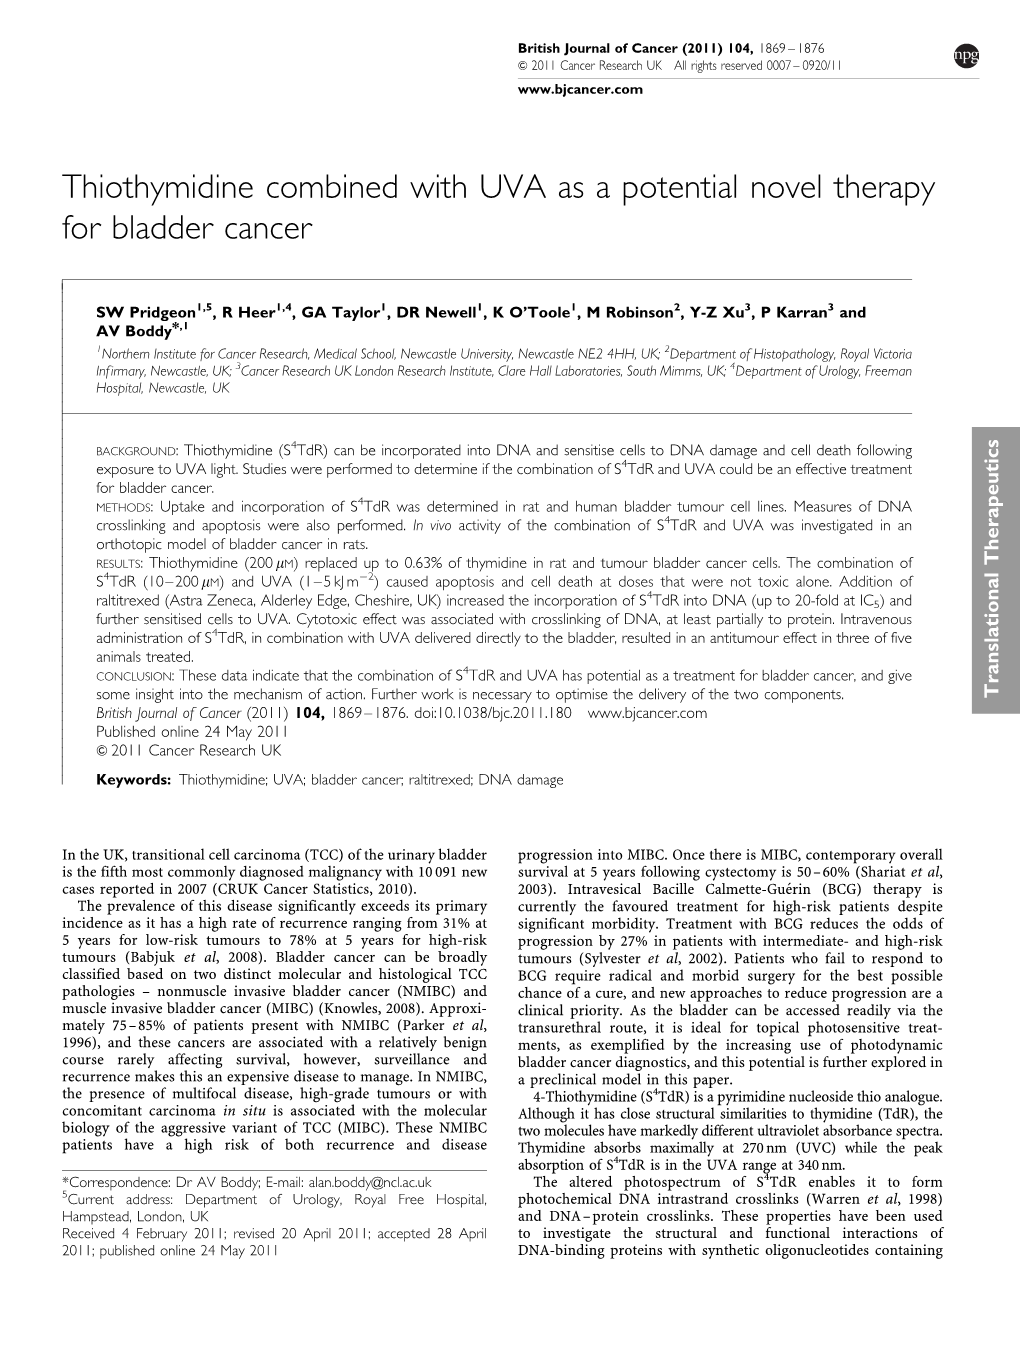 Thiothymidine Combined with UVA As a Potential Novel Therapy for Bladder Cancer